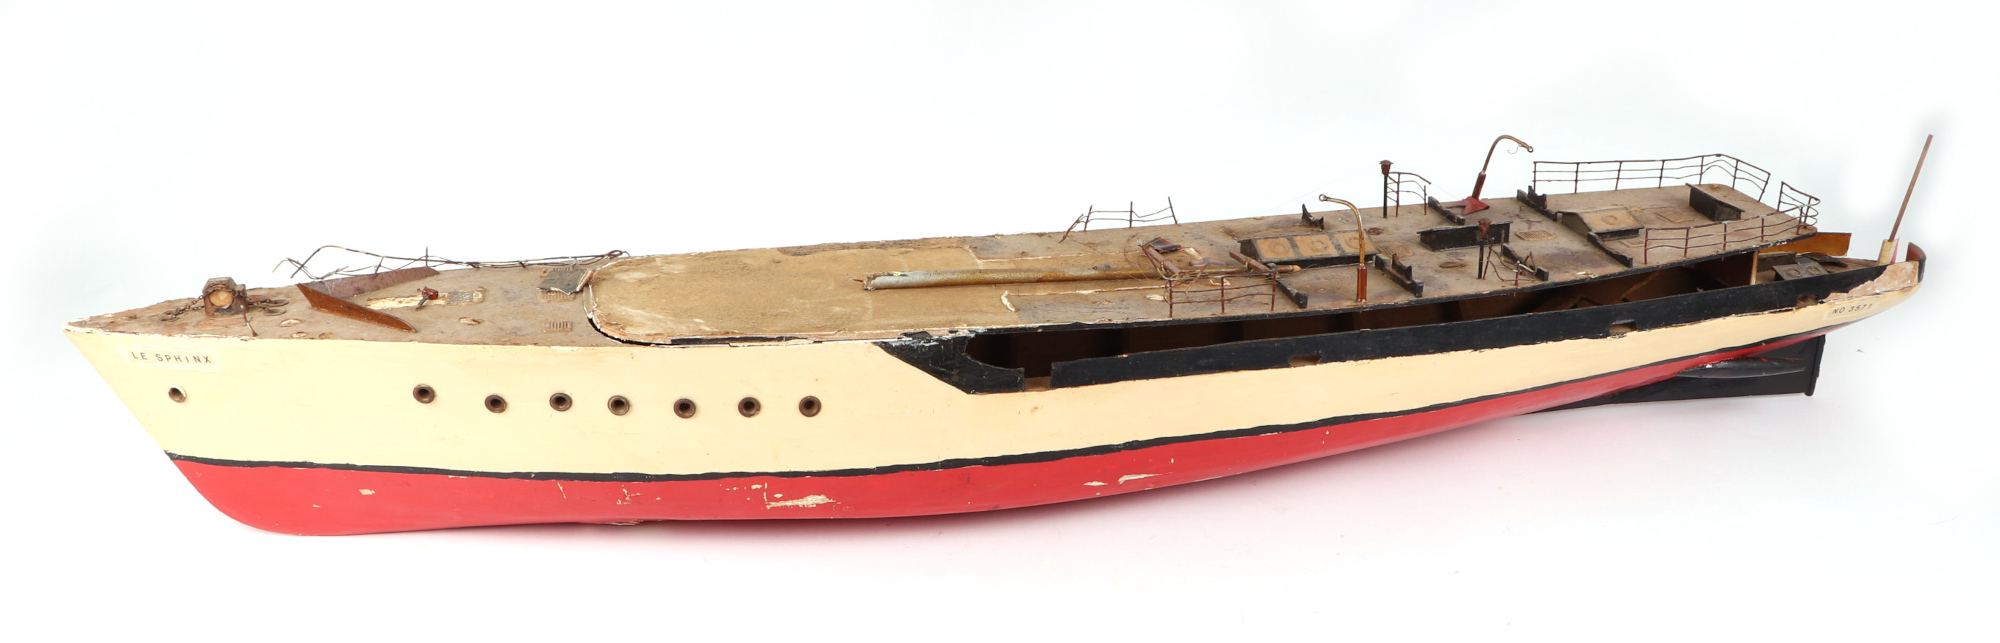 A scratch built model of a warship with painted wooden hull, approx 125cm long; together with - Image 12 of 13